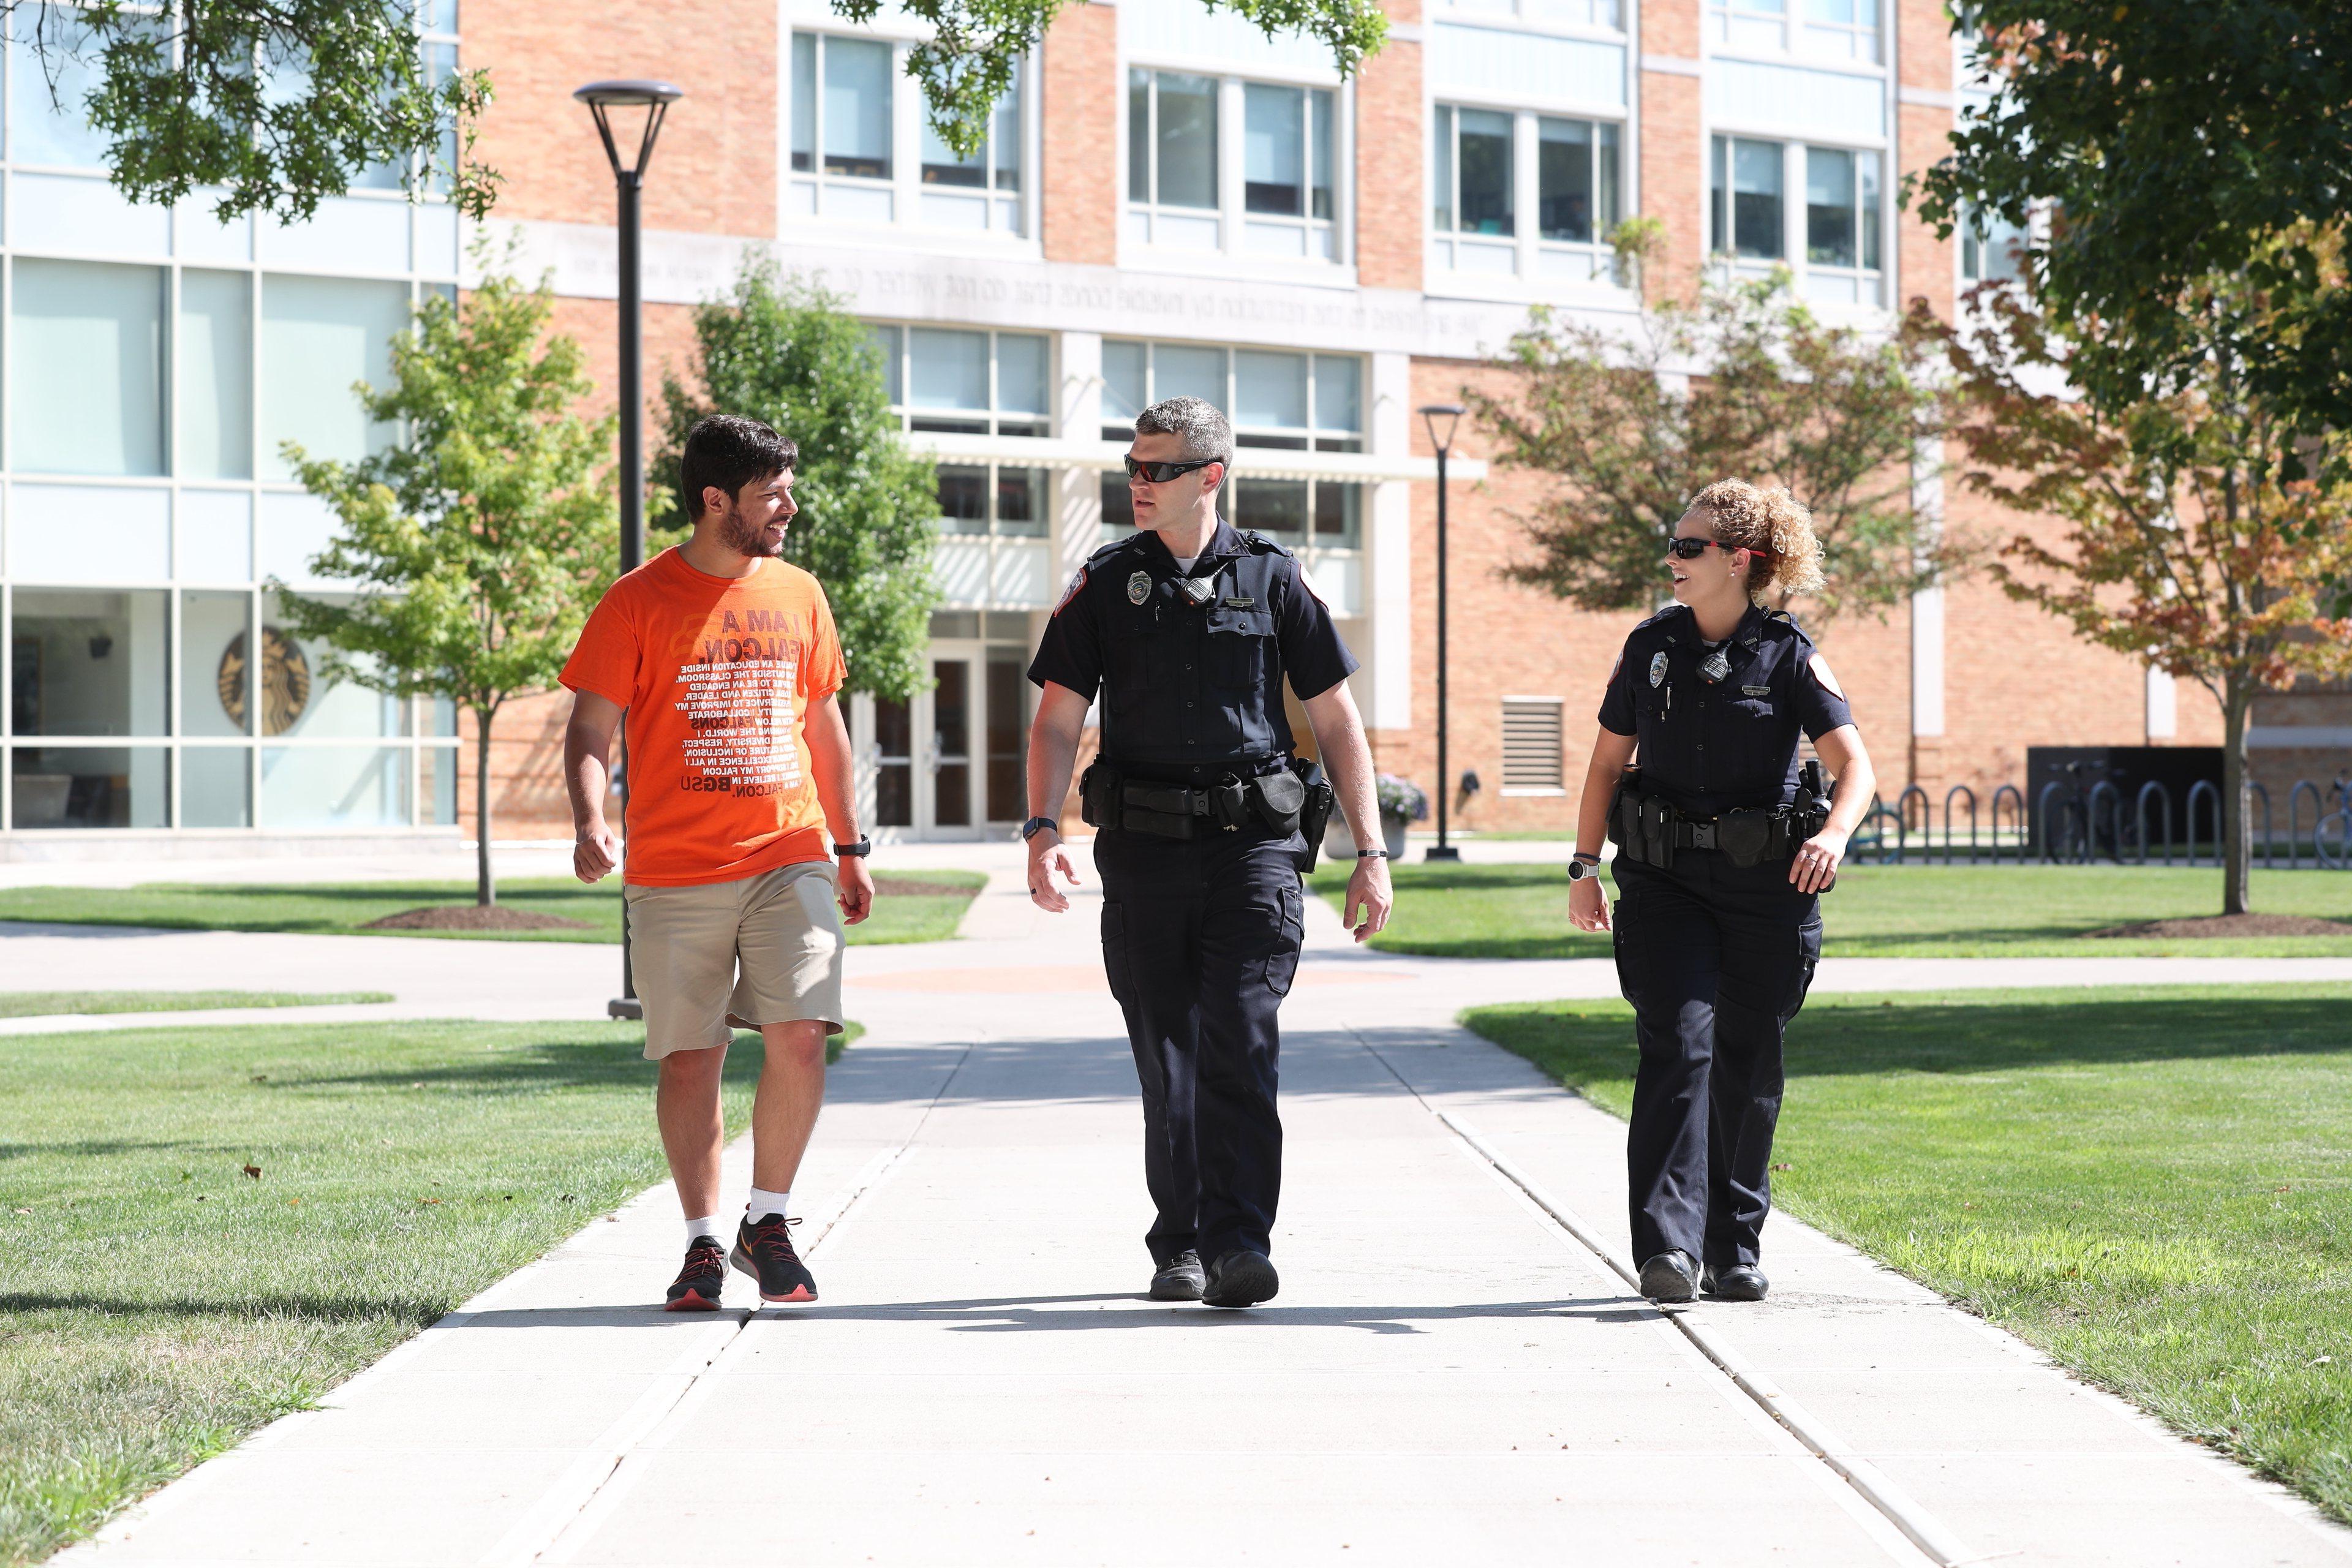 cops-and-student-walking-together-on-campus -